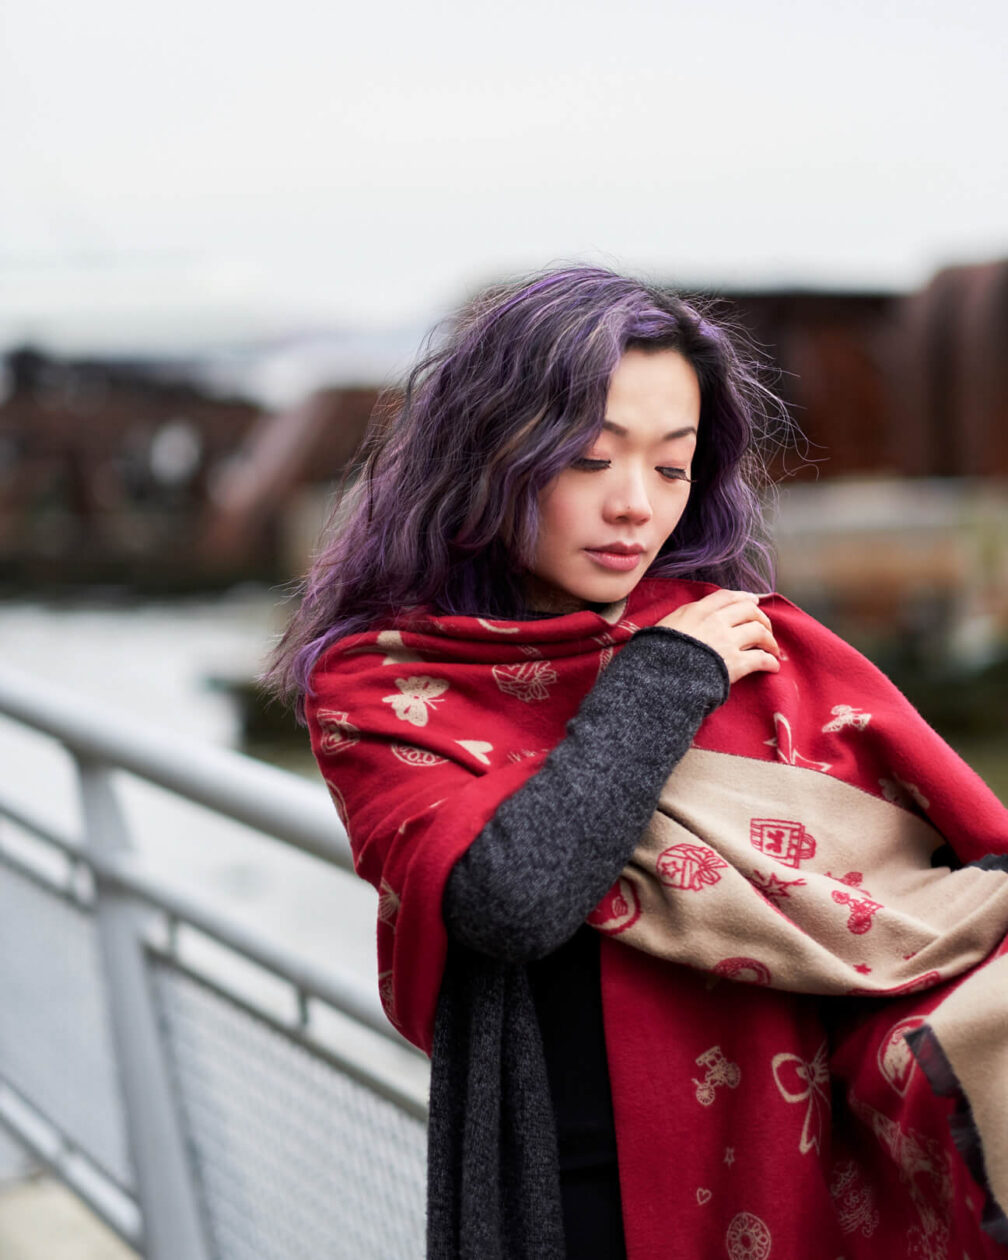 Fuji X Pro2 with xf 56mm f1.2 - Asian woman with scarf - Portrait Fashion Photography in Riverside Park New York - Model: LisePro2 with Fujinon xf 56mm 1.2 - Asian woman with scarf - Portrait Fashion Photography in Riverside Park New York - Model: Lise